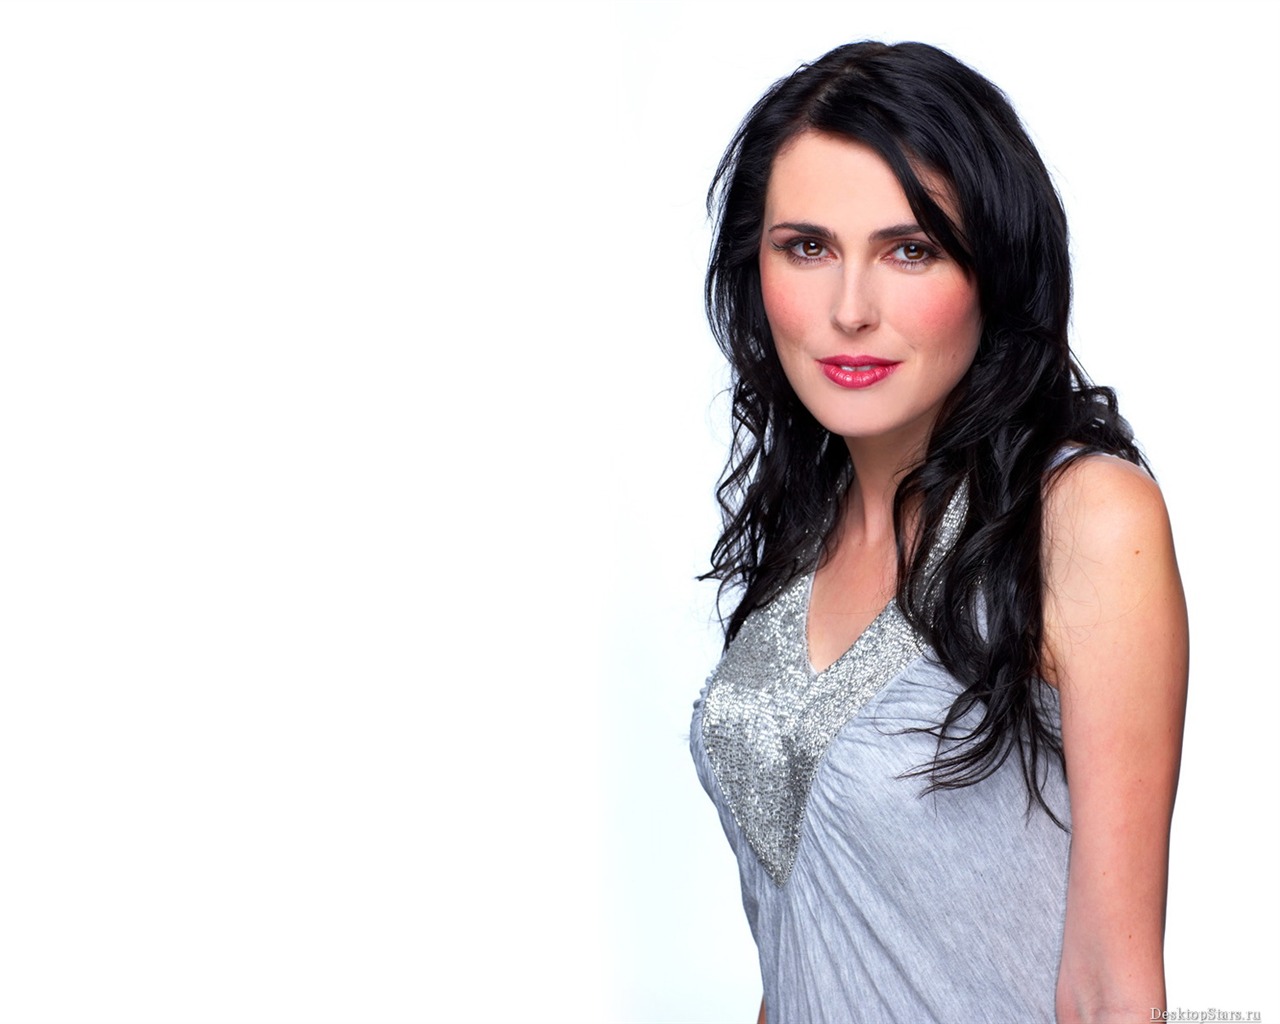 Sharon den Adel #007 - 1280x1024 Wallpapers Pictures Photos Images